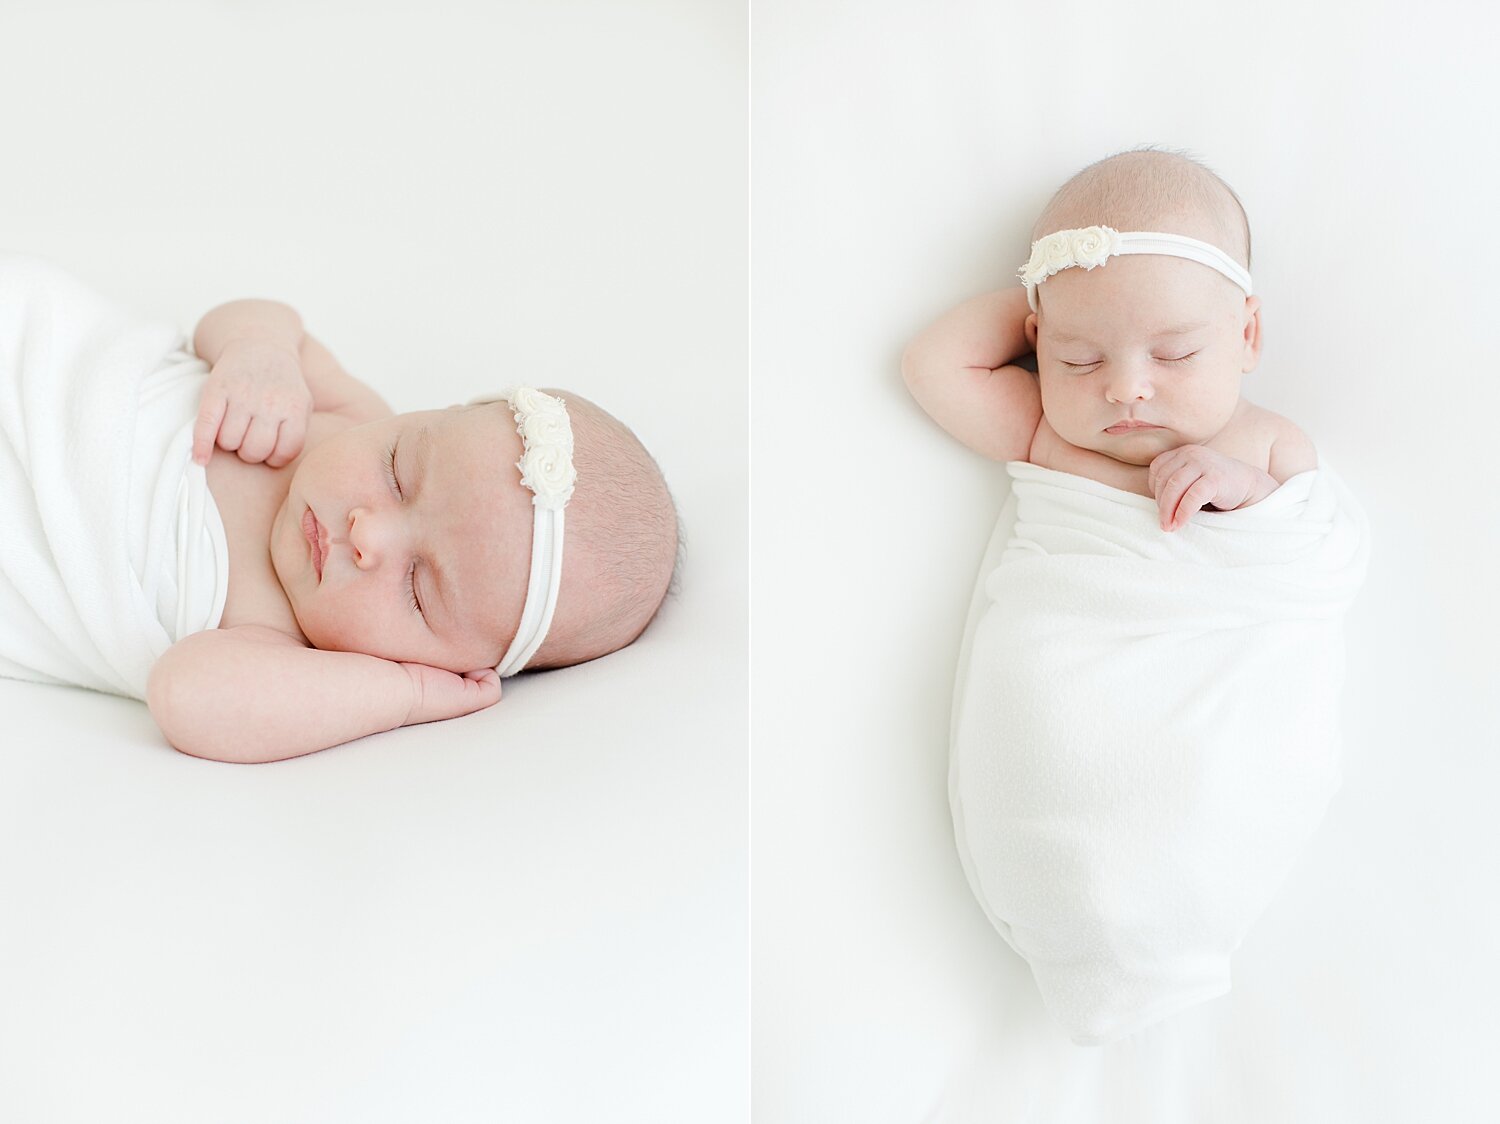 Baby girl swaddled in white with white headband for newborn session with Fairfield County photographer, Kristin Wood Photography.